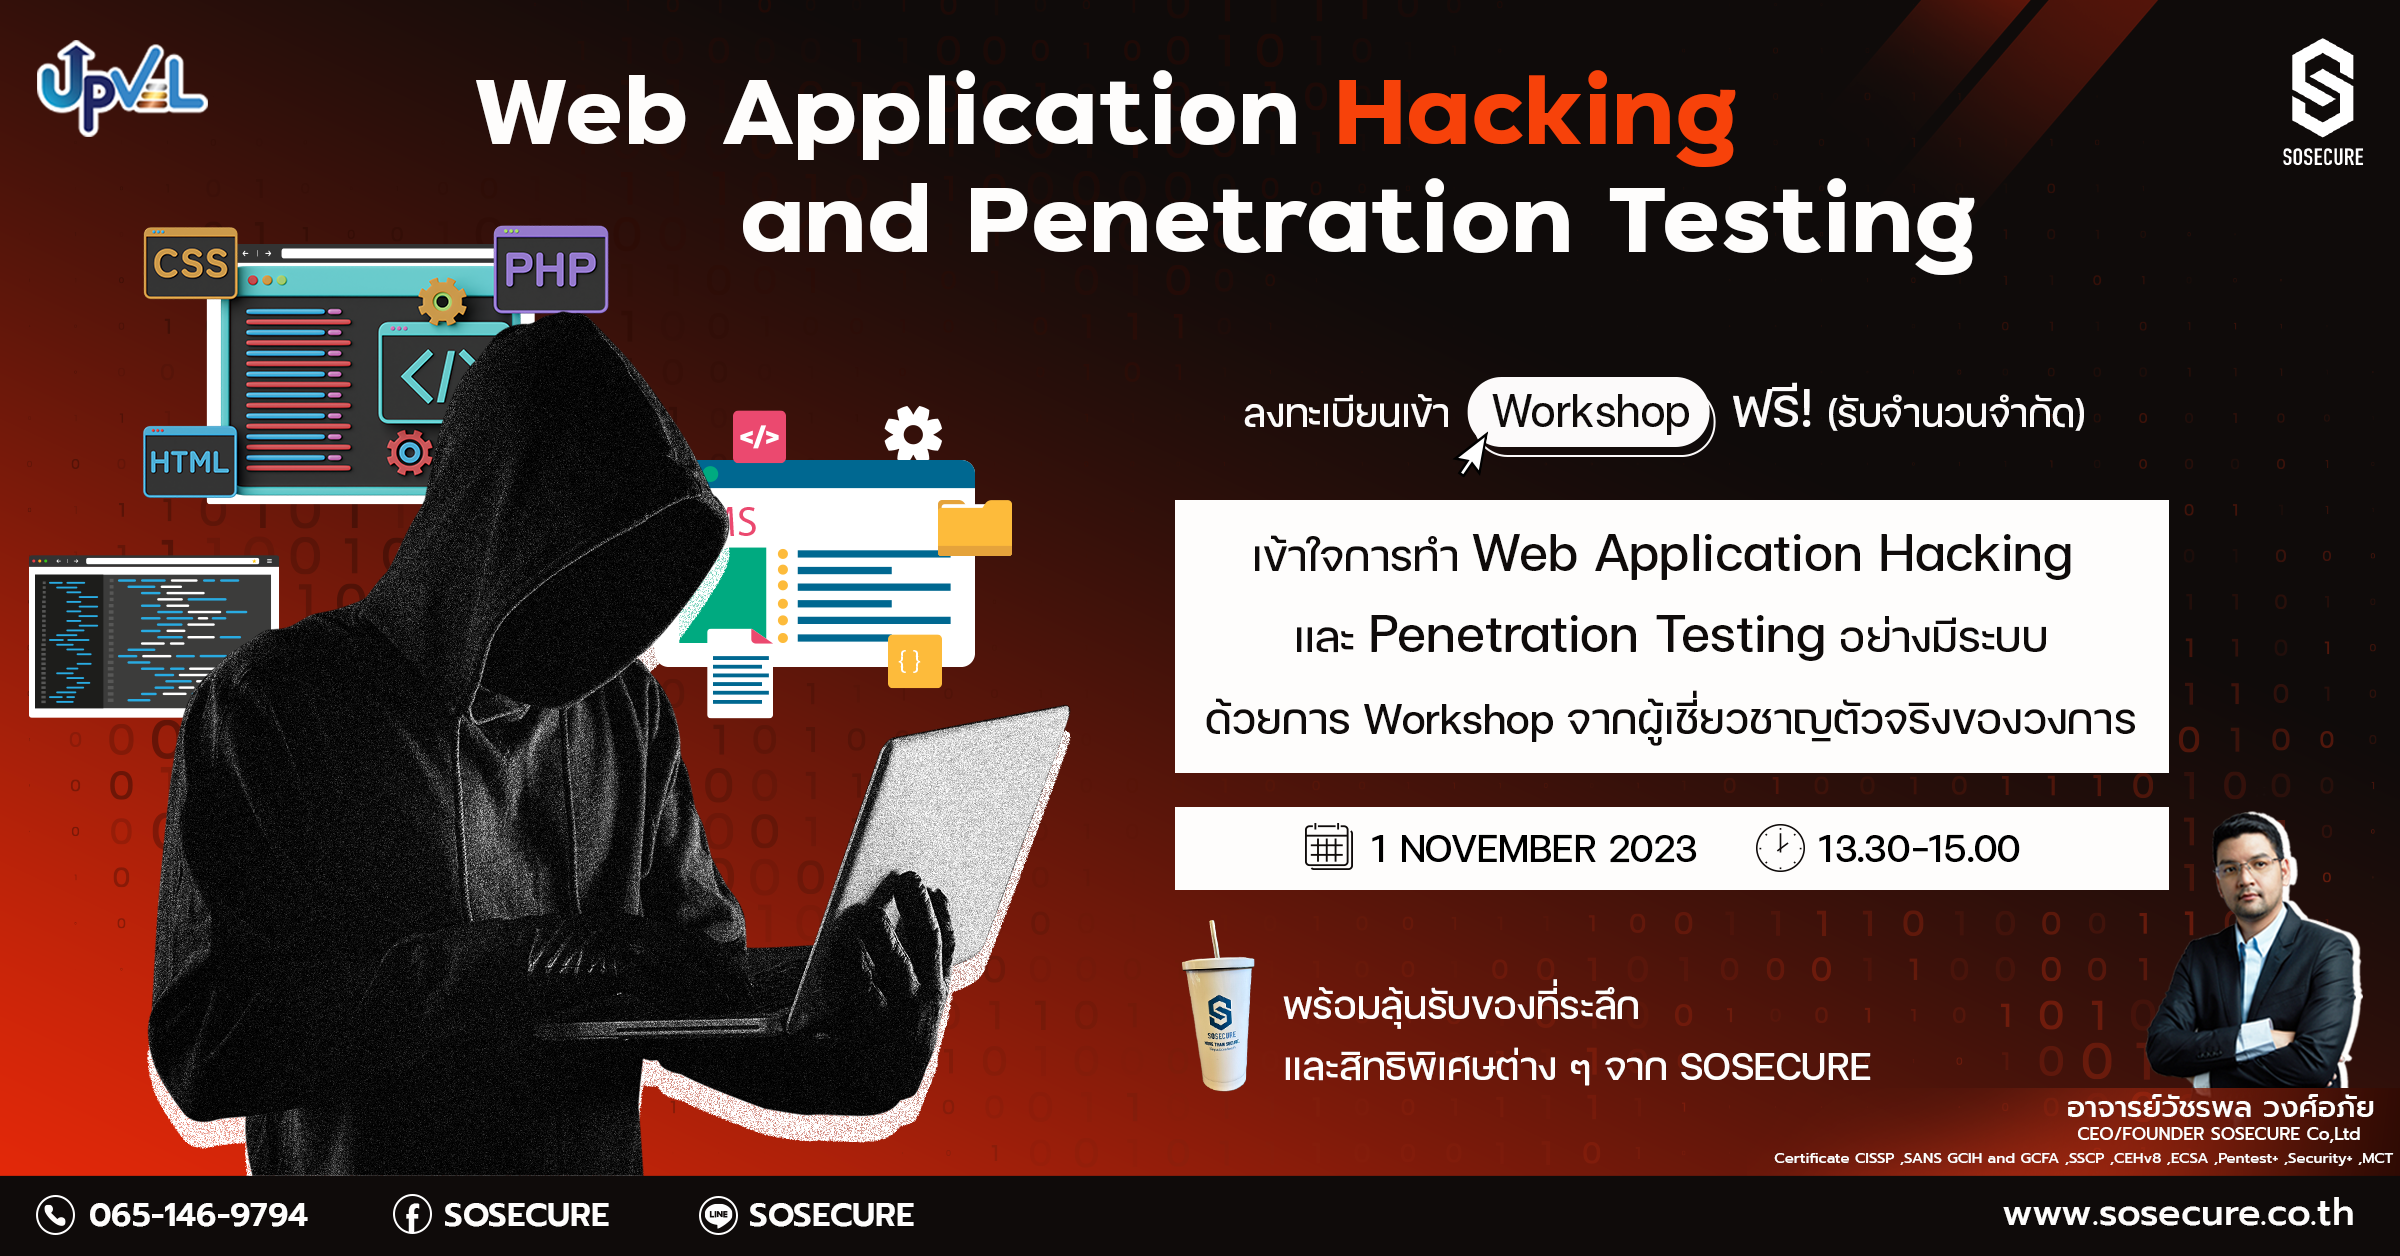 Web Application Hacking and Penetration Testing